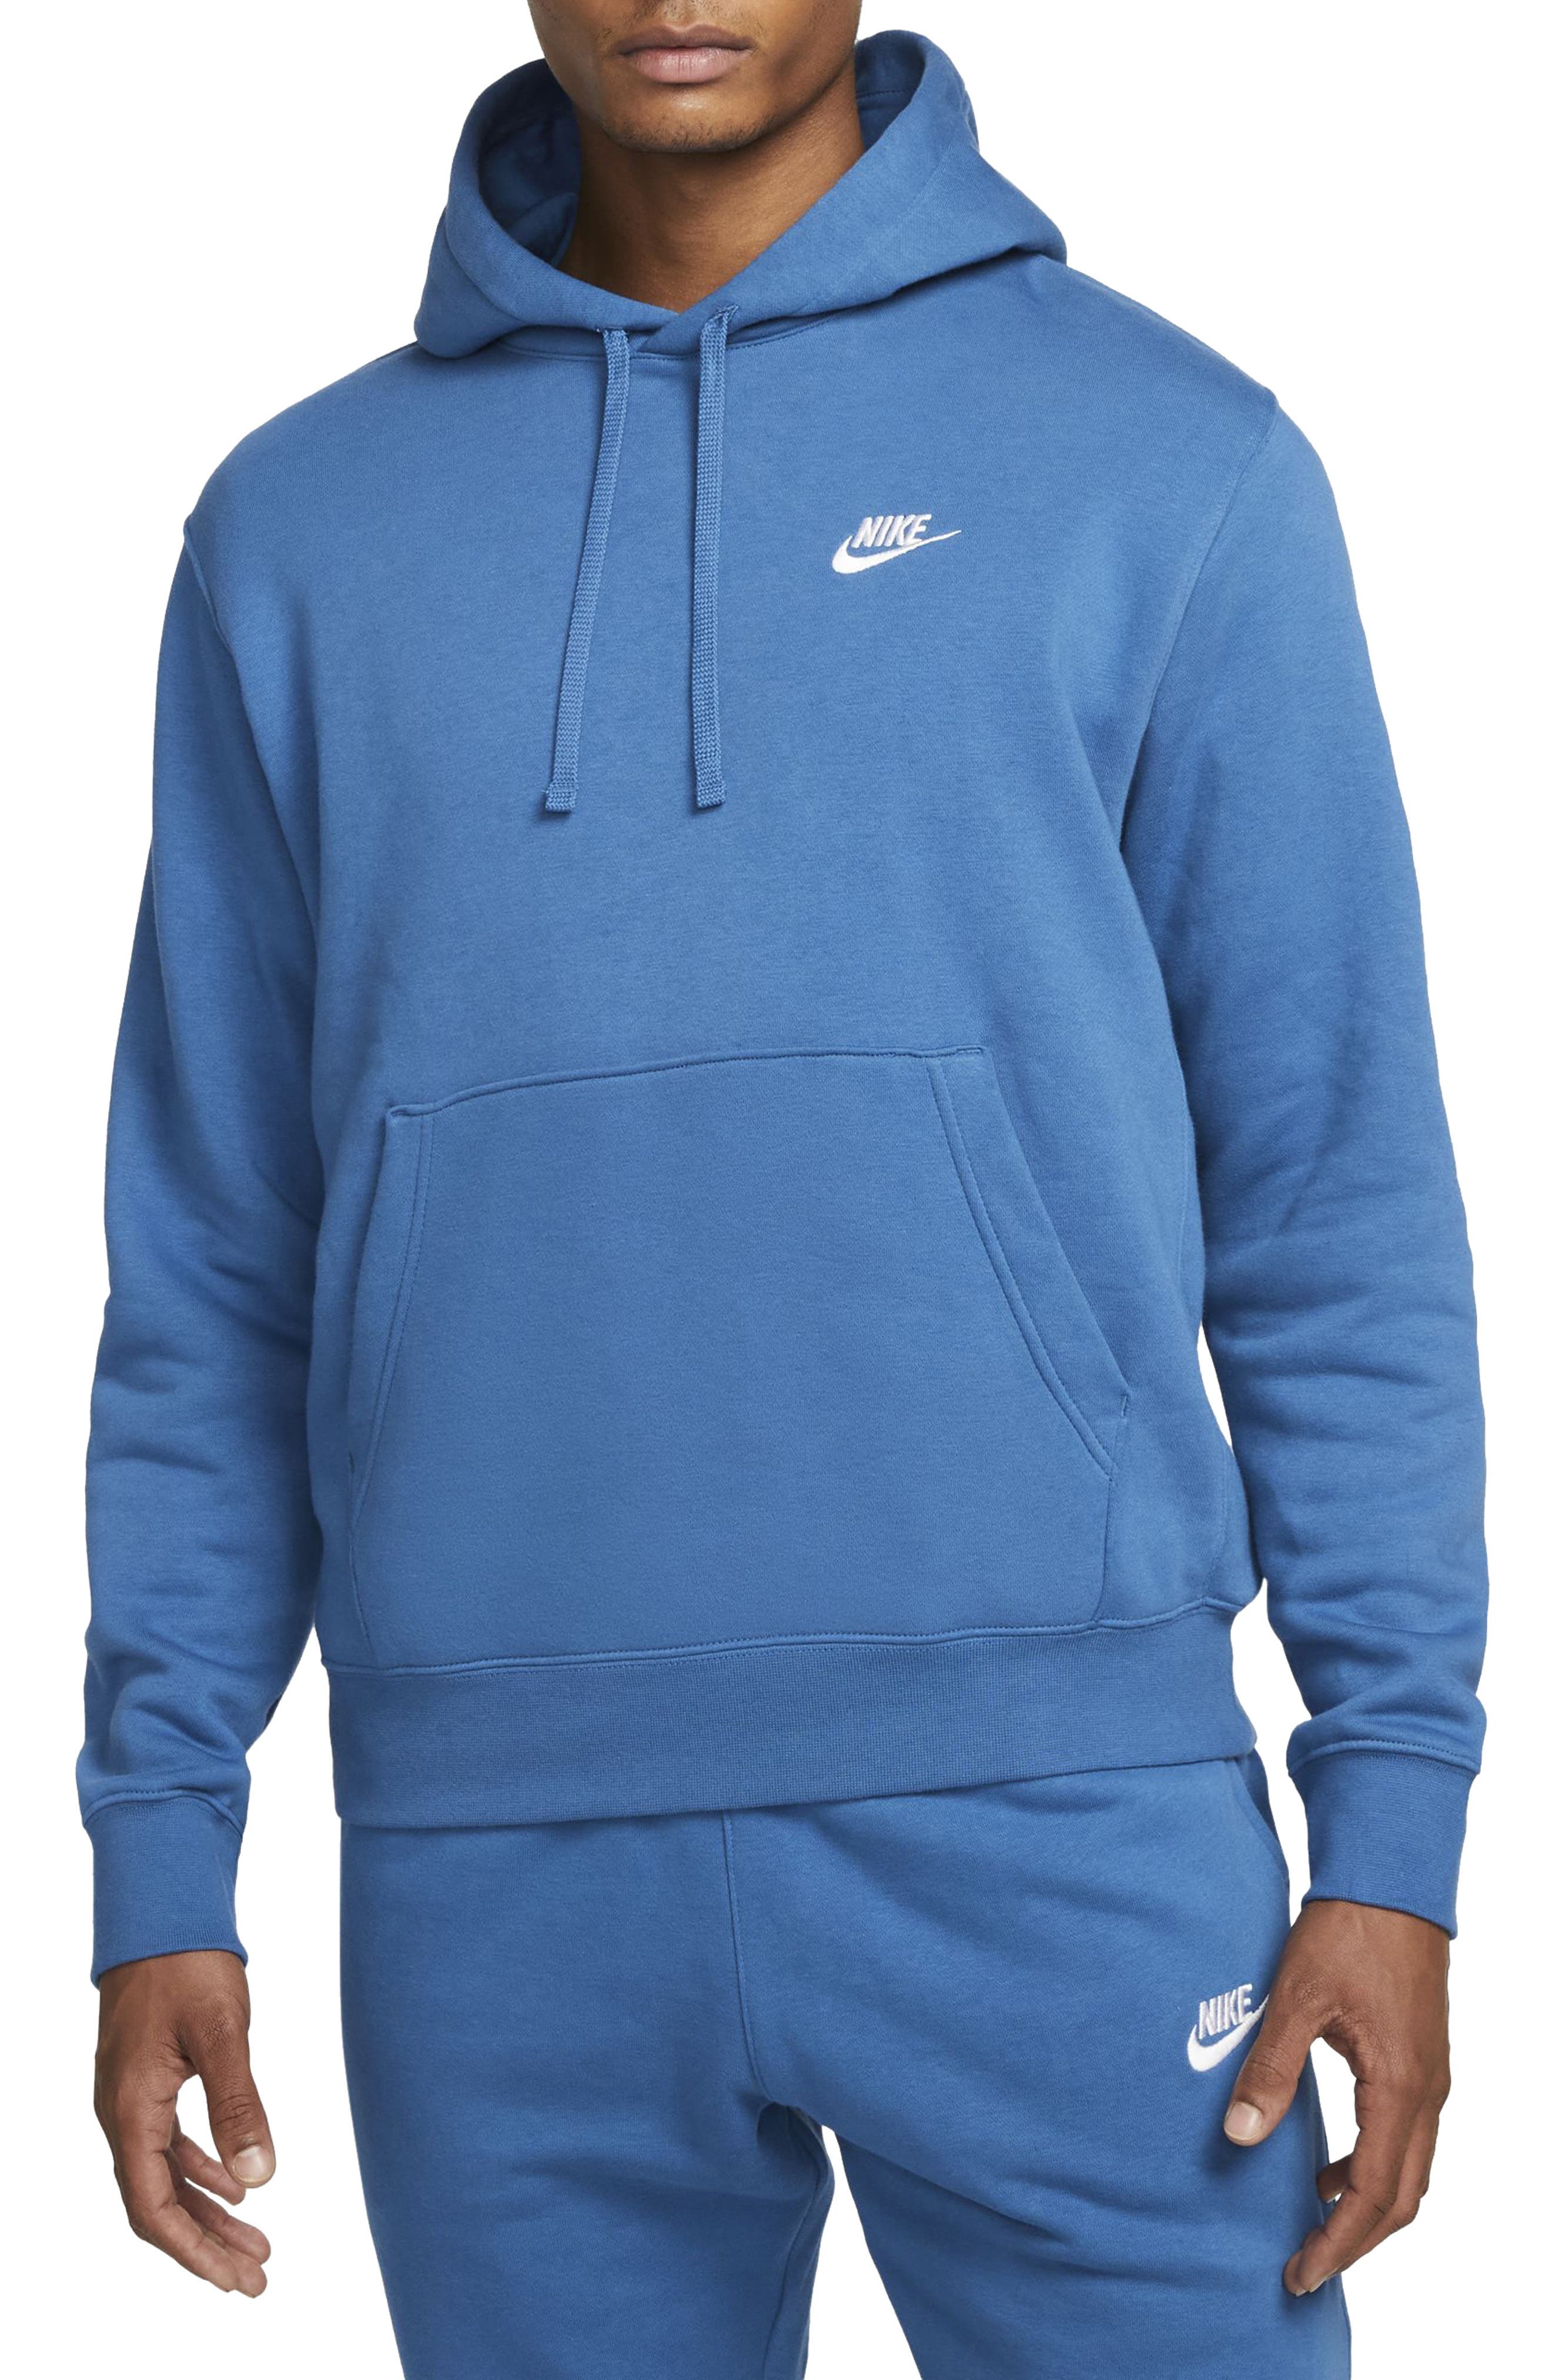 Moschino Fleece Sweatshirt in Bright Blue gym and workout clothes Sweatshirts for Men Blue Mens Clothing Activewear 